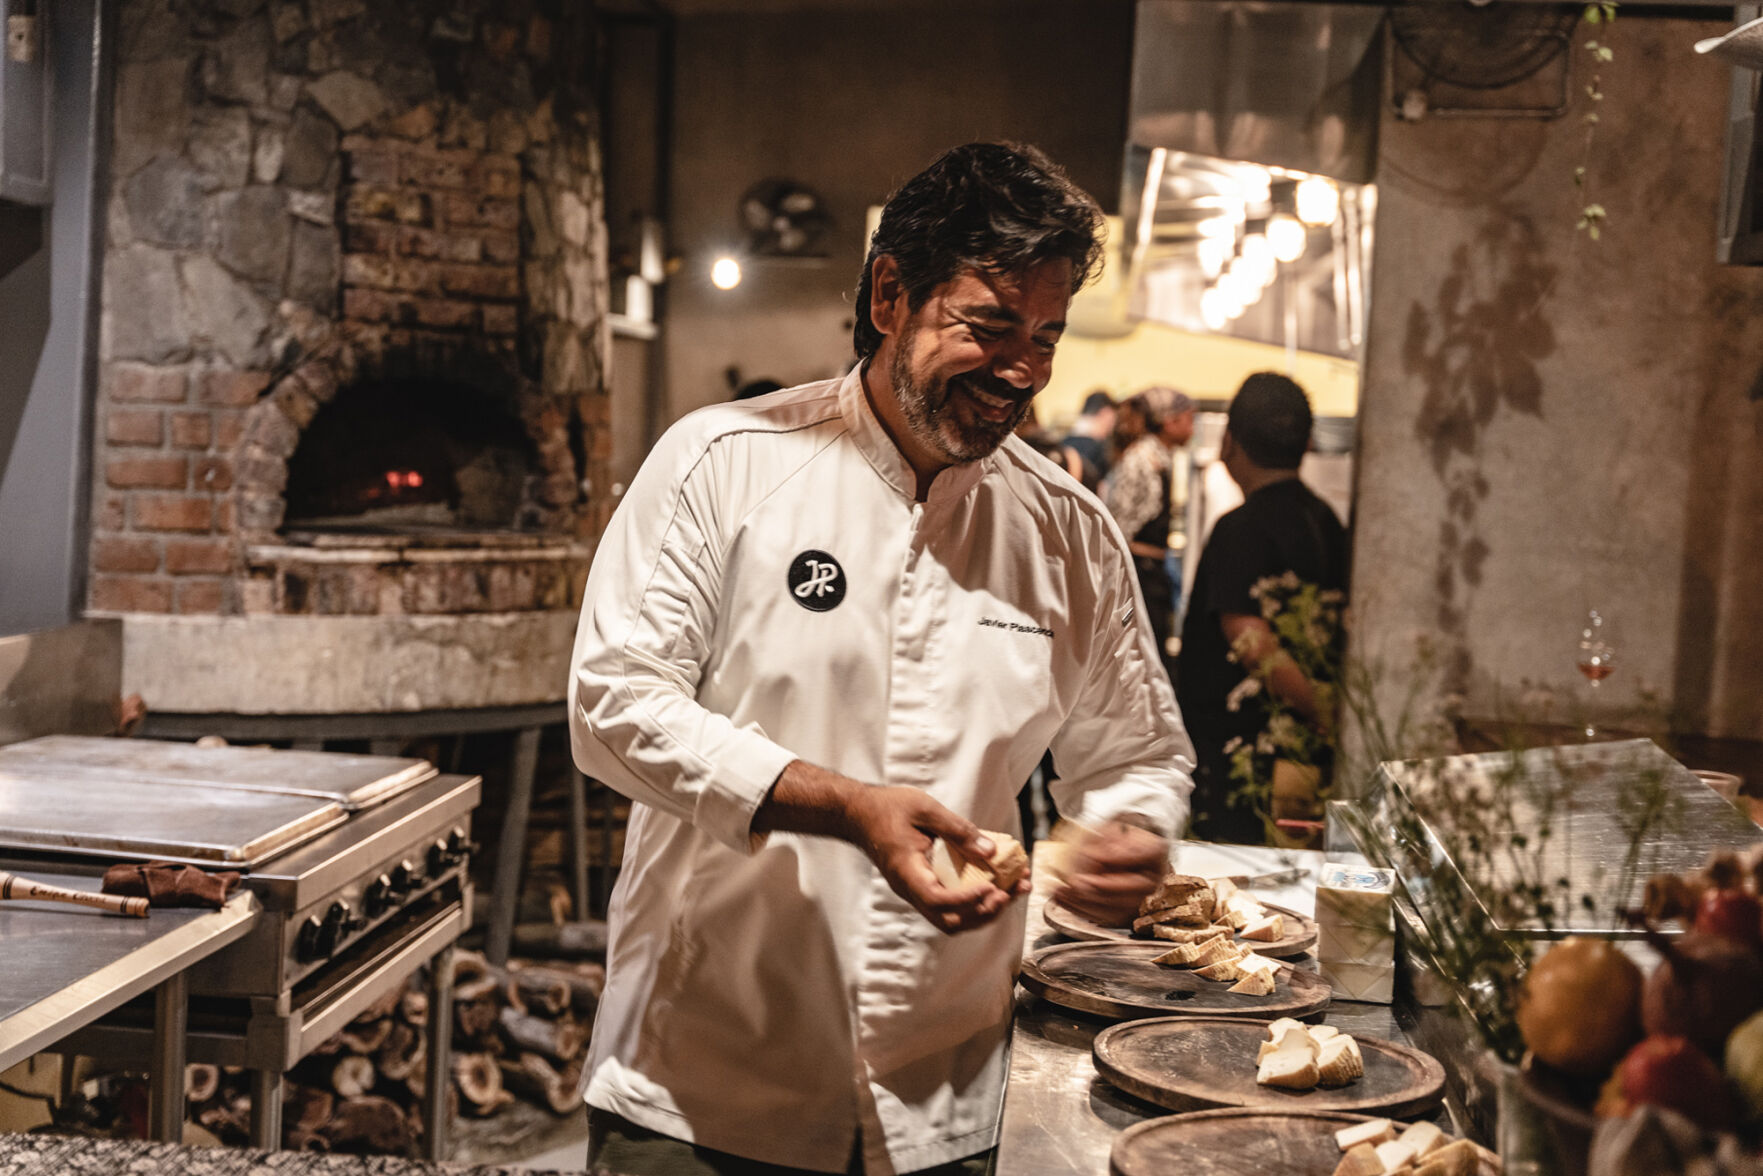 Chef Javier Plascencia at the Chefs Dinner